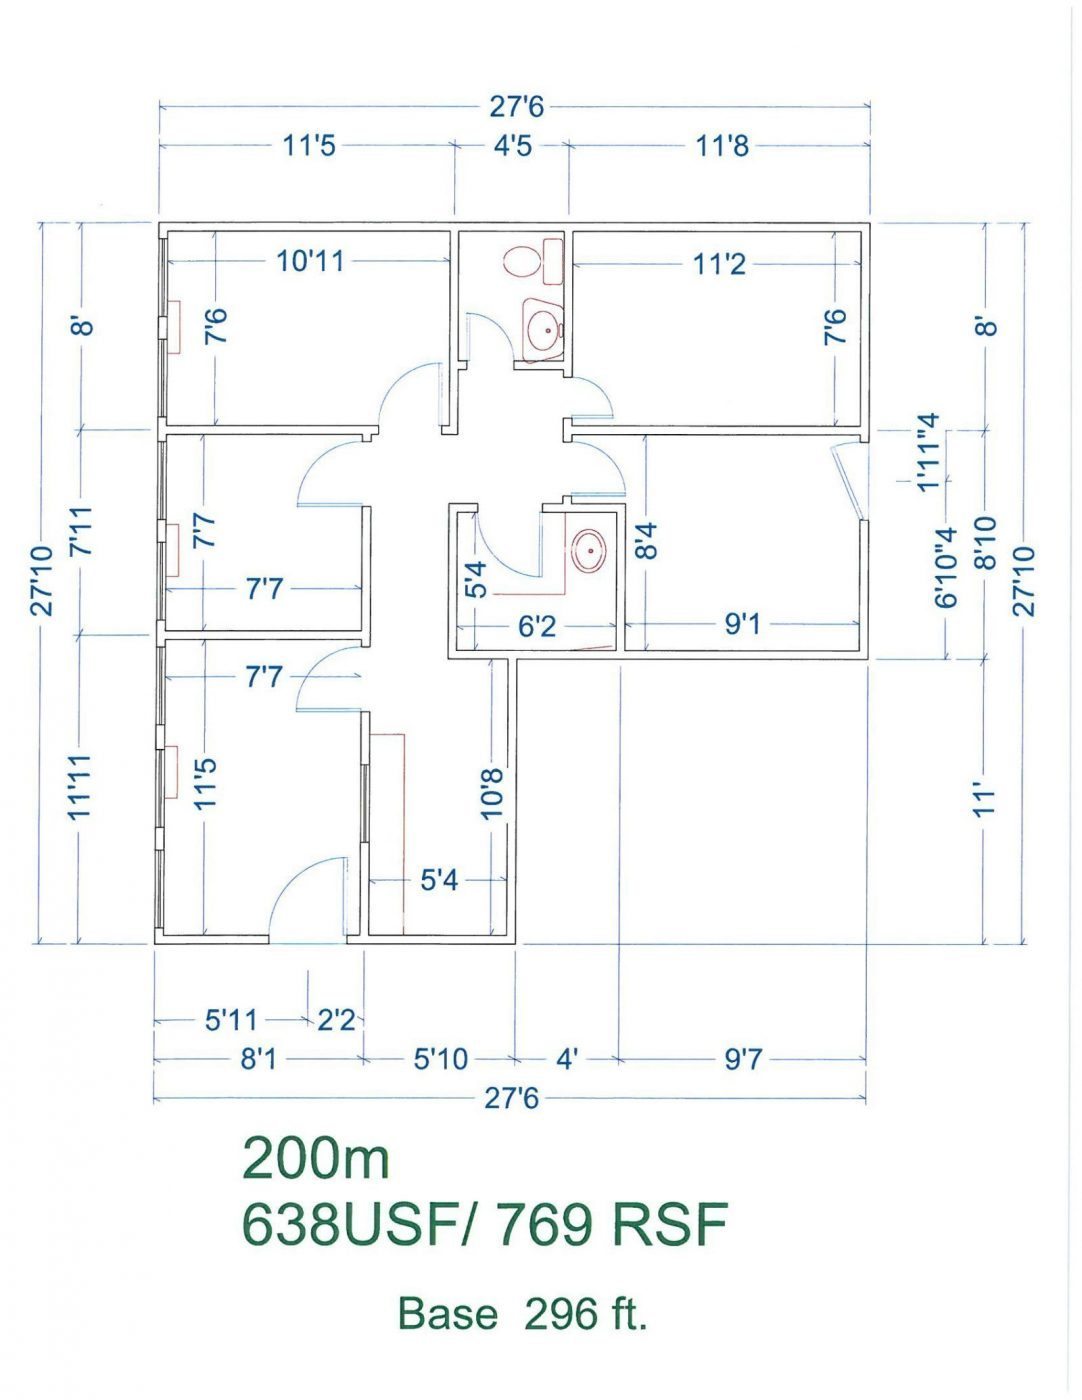 Floor Plan for unit 200M at 20905 Greenfield Rd - 2nd Floor Southfield, MI 48075